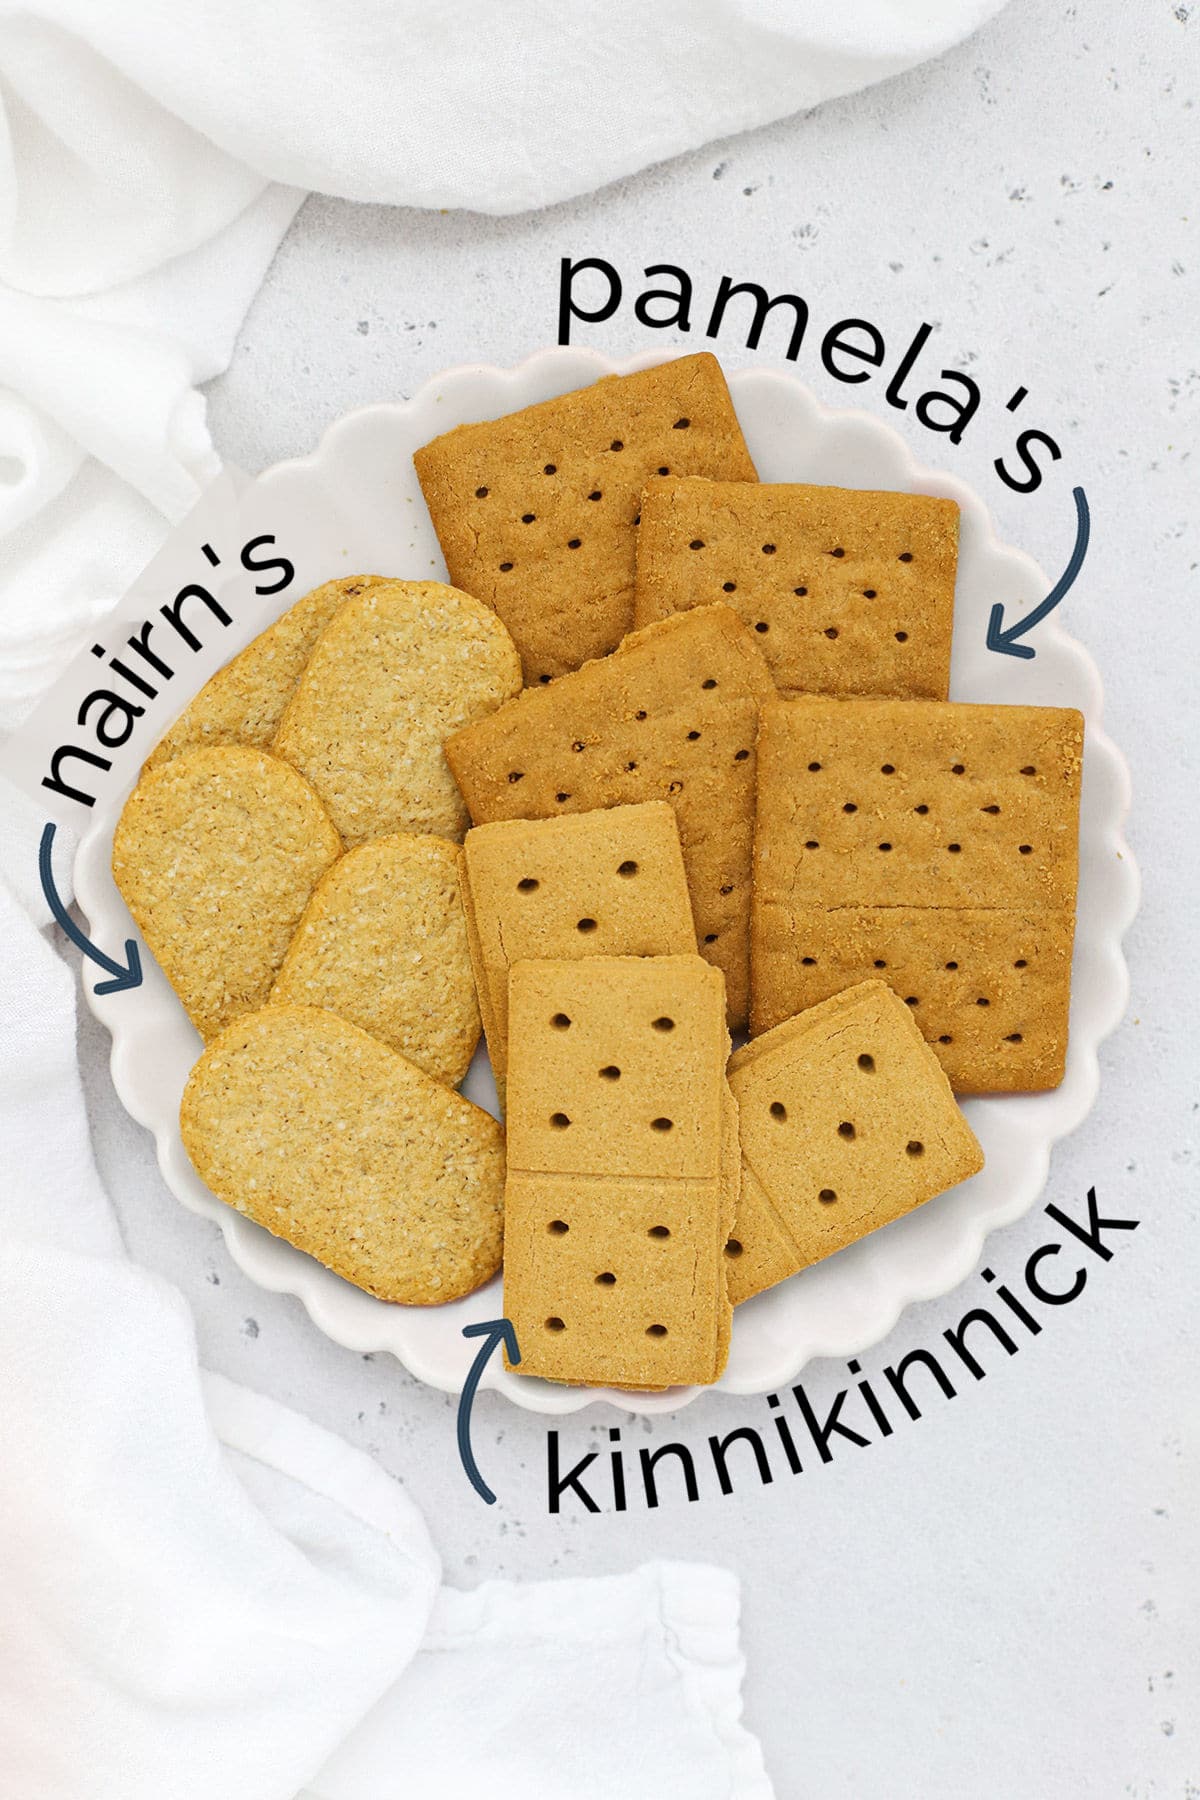 Overhead view of three kinds of gluten-free graham crackers on a white scallop plate